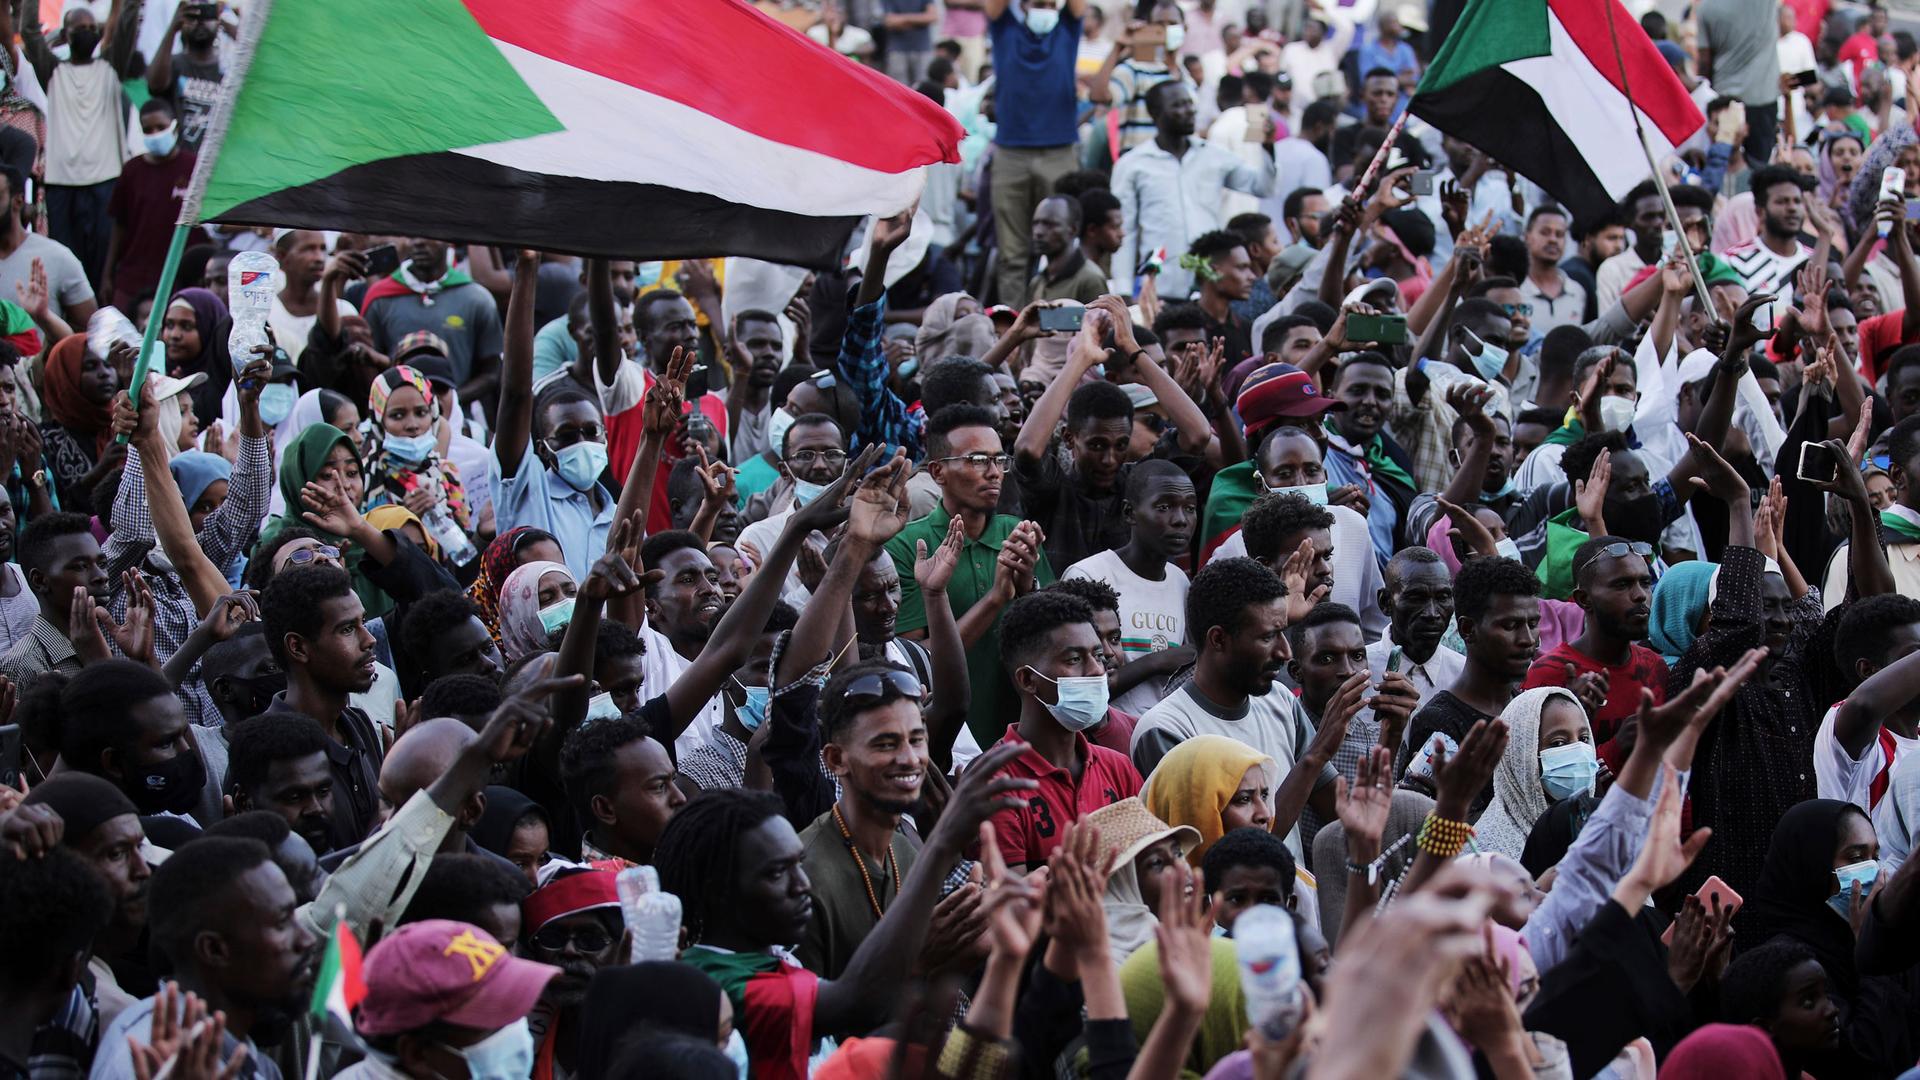 People chant slogans during a protest in Khartoum, Sudan, Saturday, Oct. 30, 2021. 